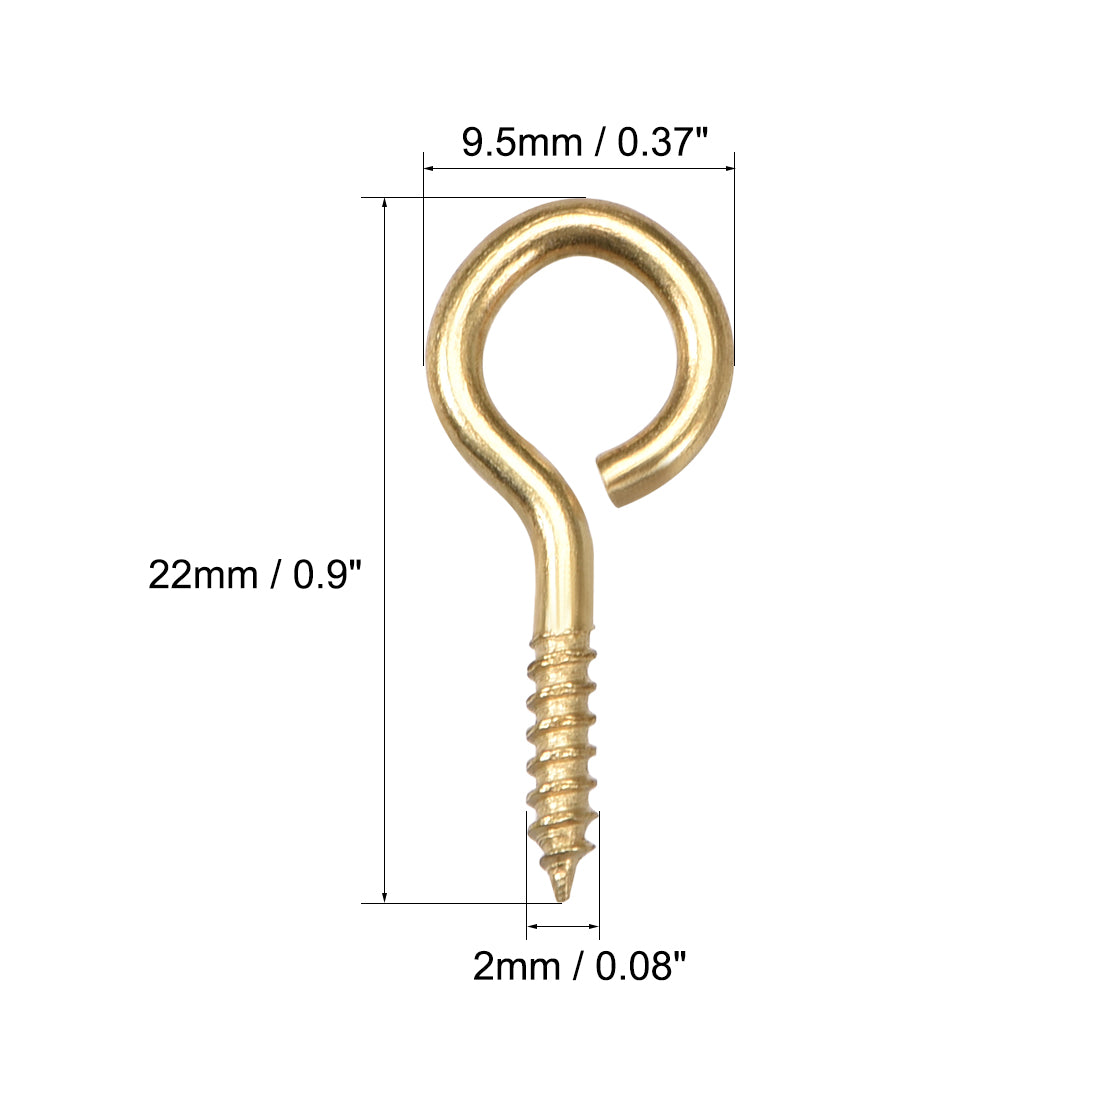 uxcell Uxcell 0.9" Small Screw Eye Hooks Self Tapping Screws Carbon Steel Screw-in Hanger Eye-Shape Ring Hooks Gold 50pcs